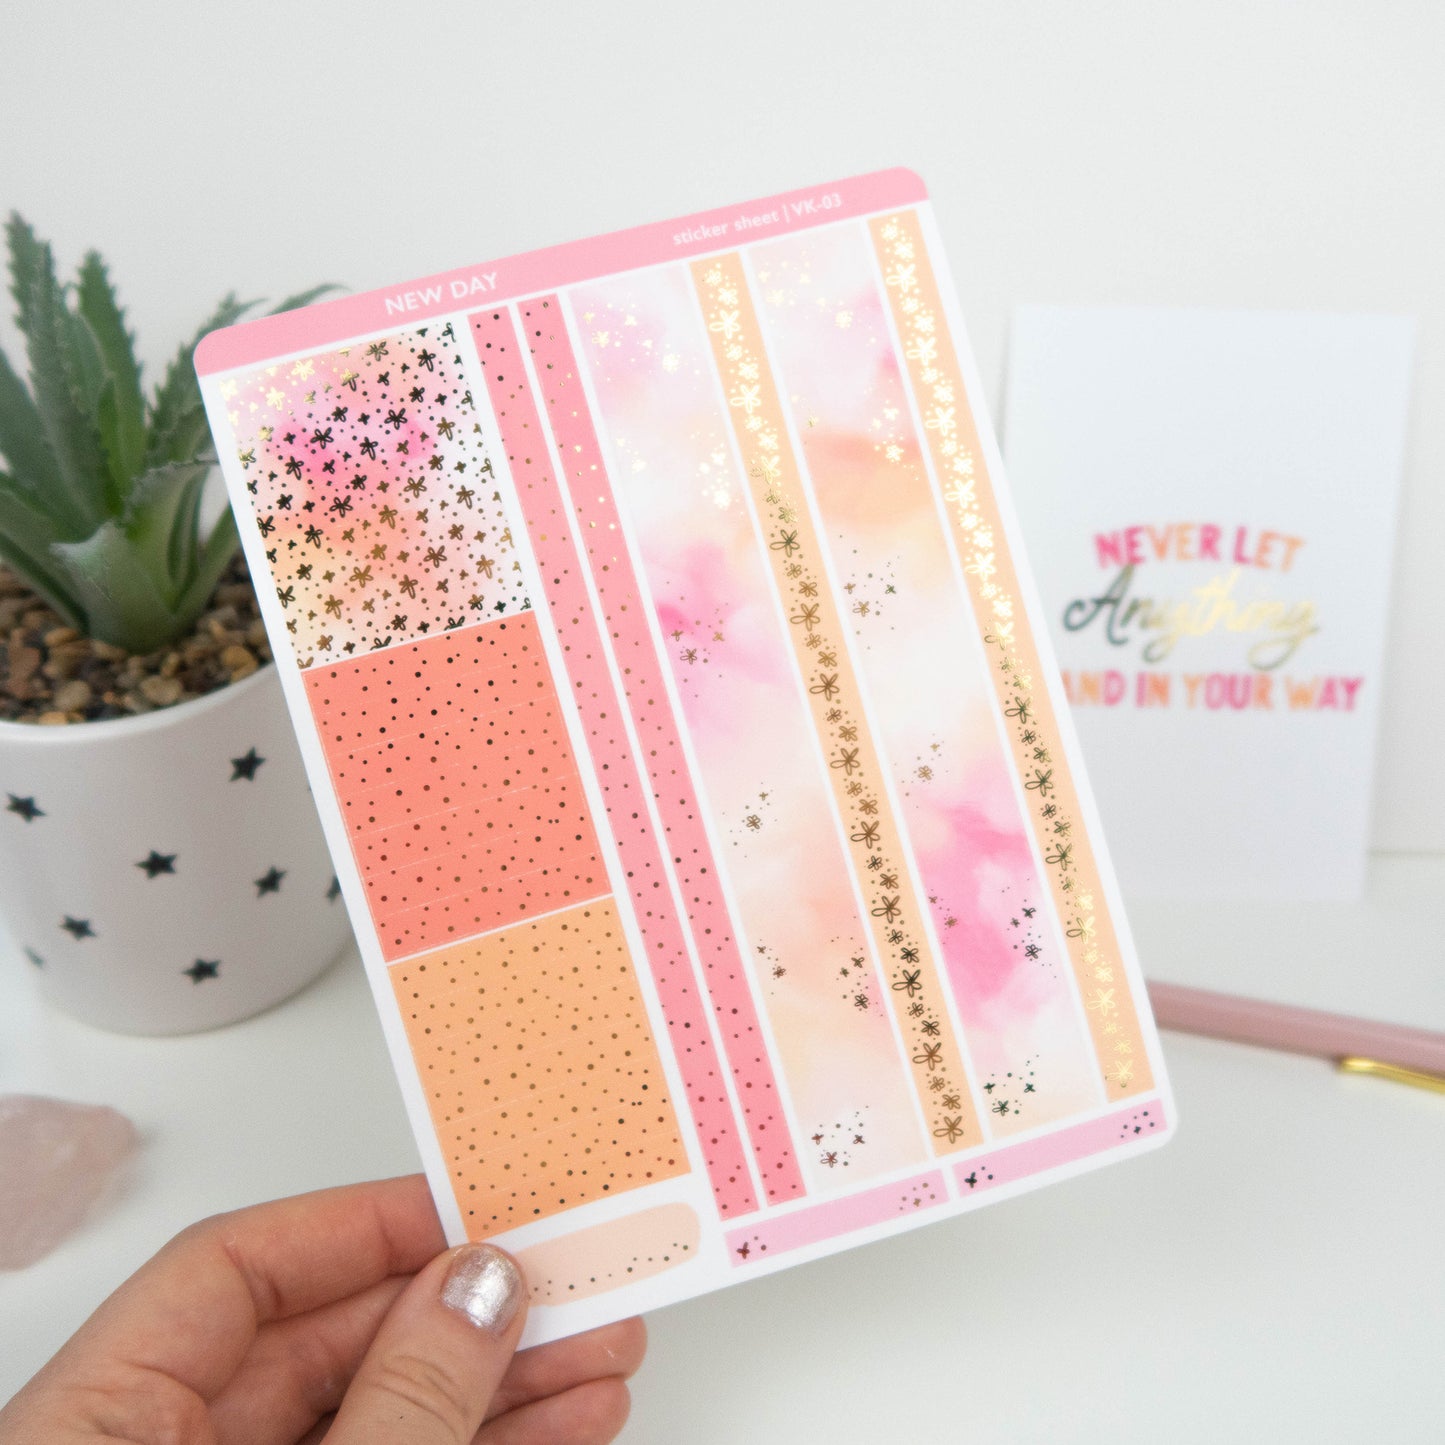 NEW DAY - VERTICAL PLANNER WEEKLY KIT